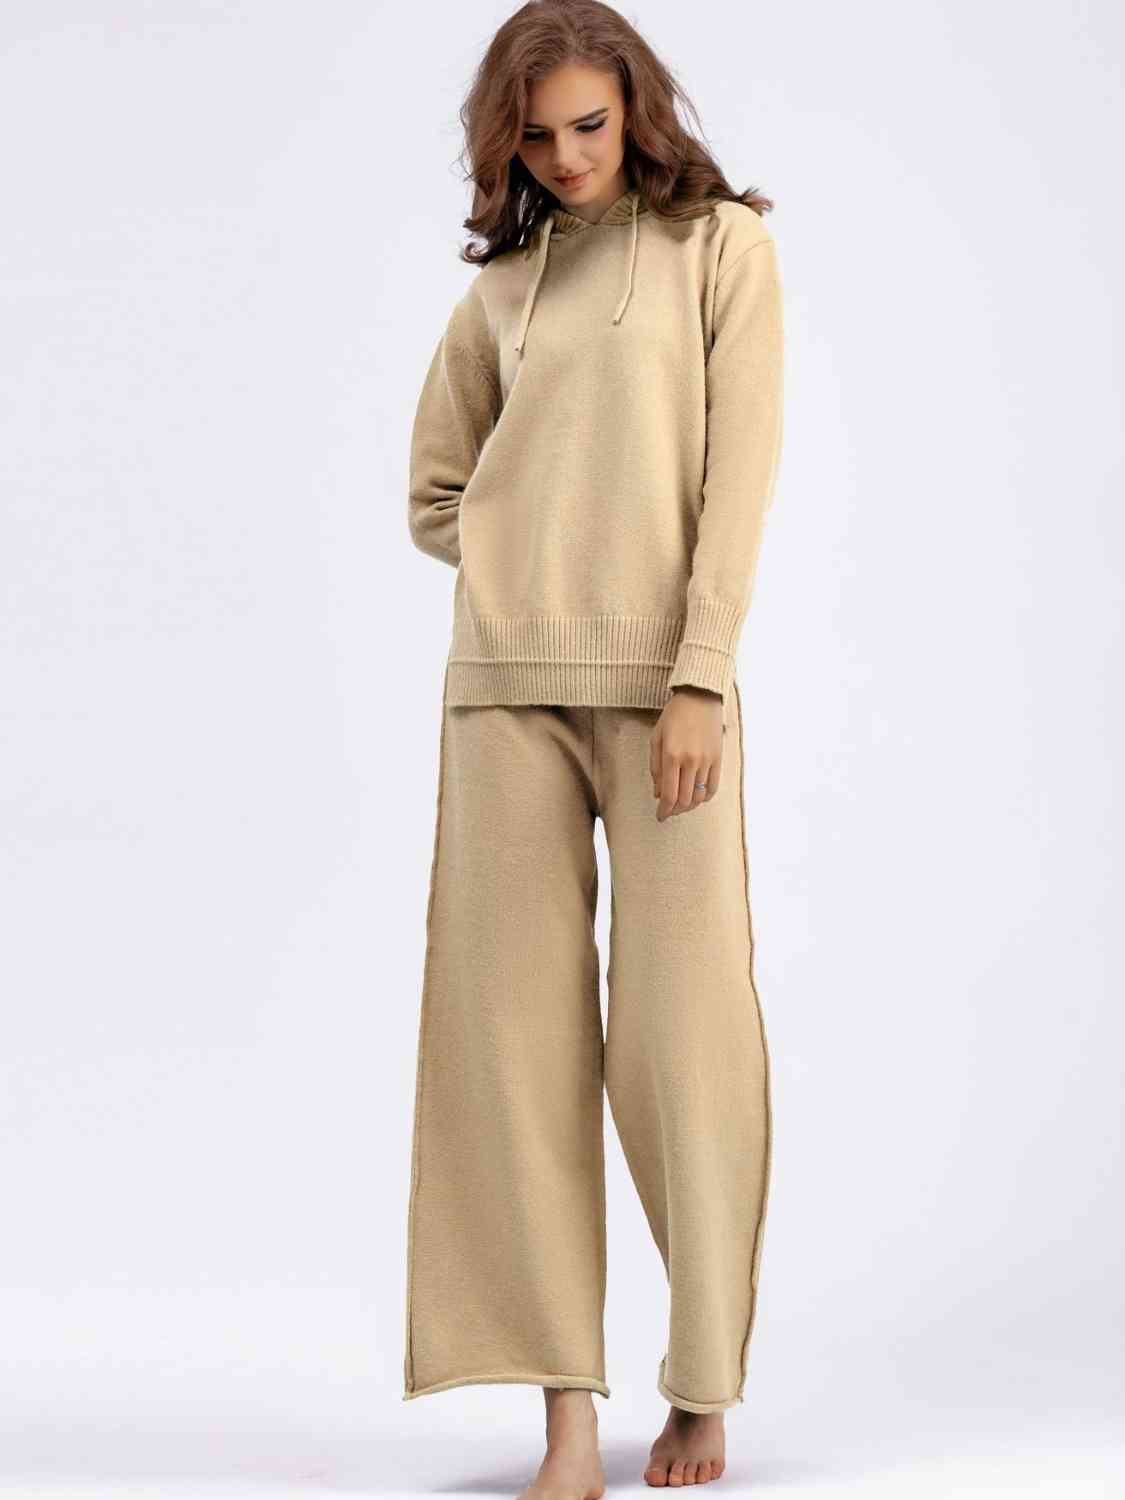 Women's Long Sleeve Hooded Sweater and Knit Pants Set Khaki One Size